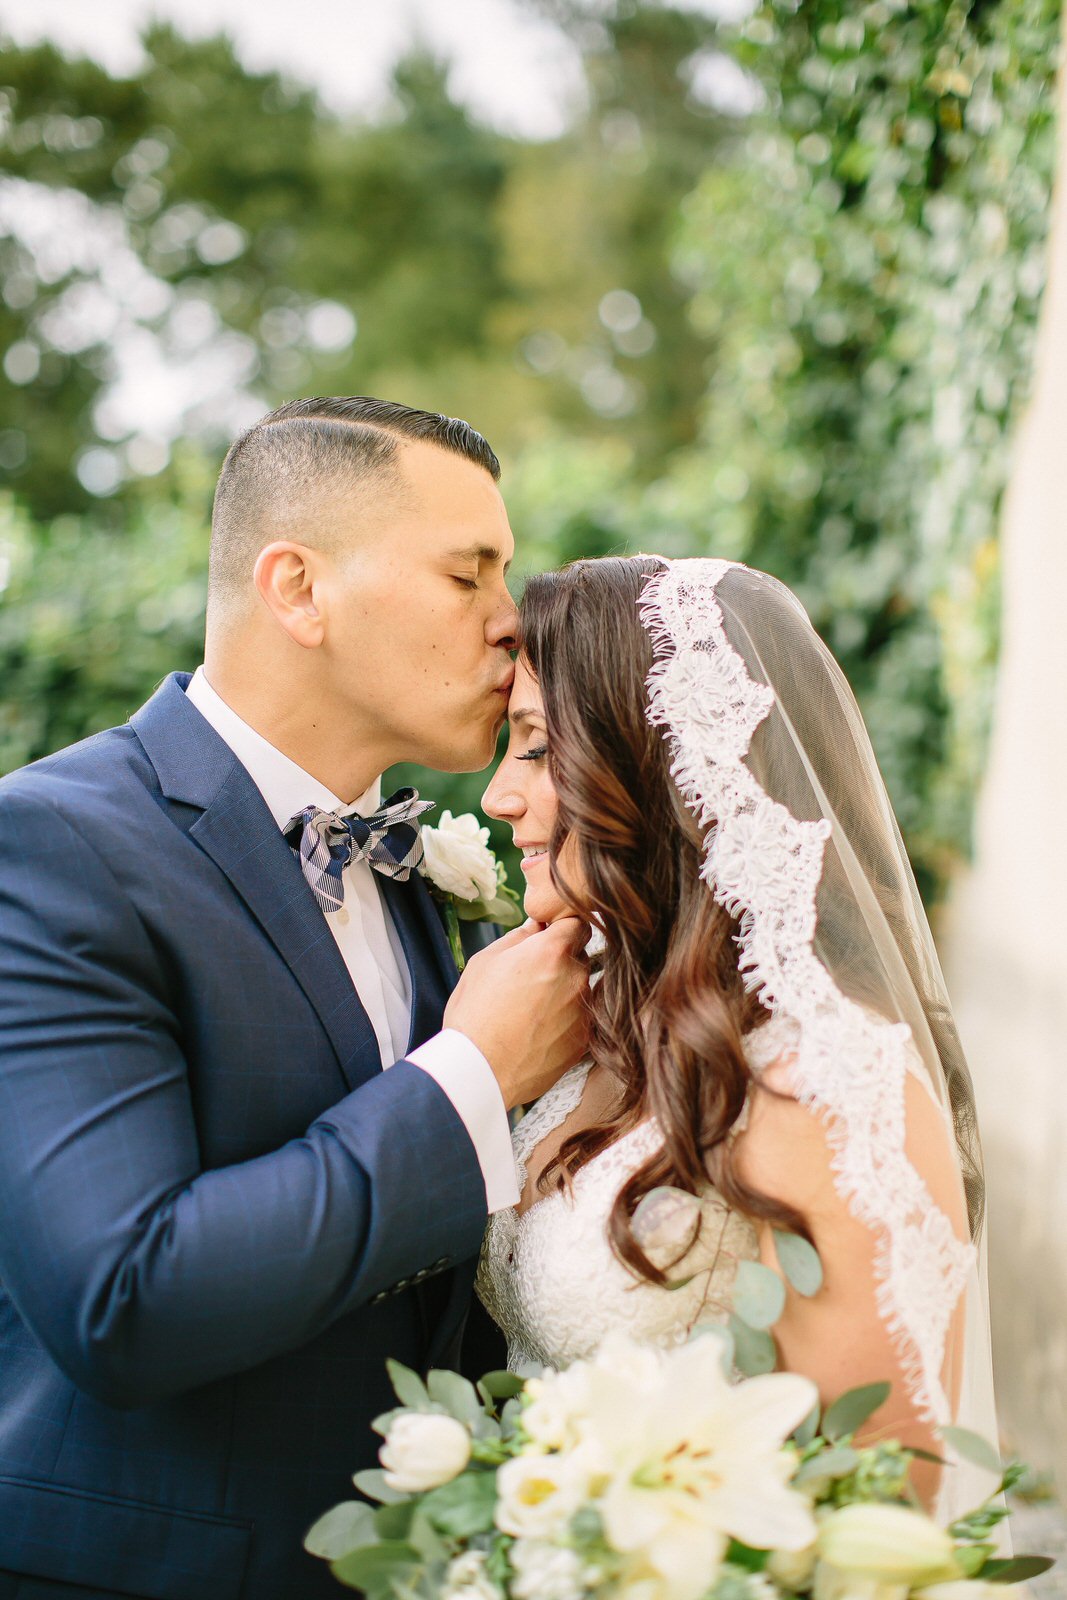 mantilla lace veil in downdo with groom kissing bride